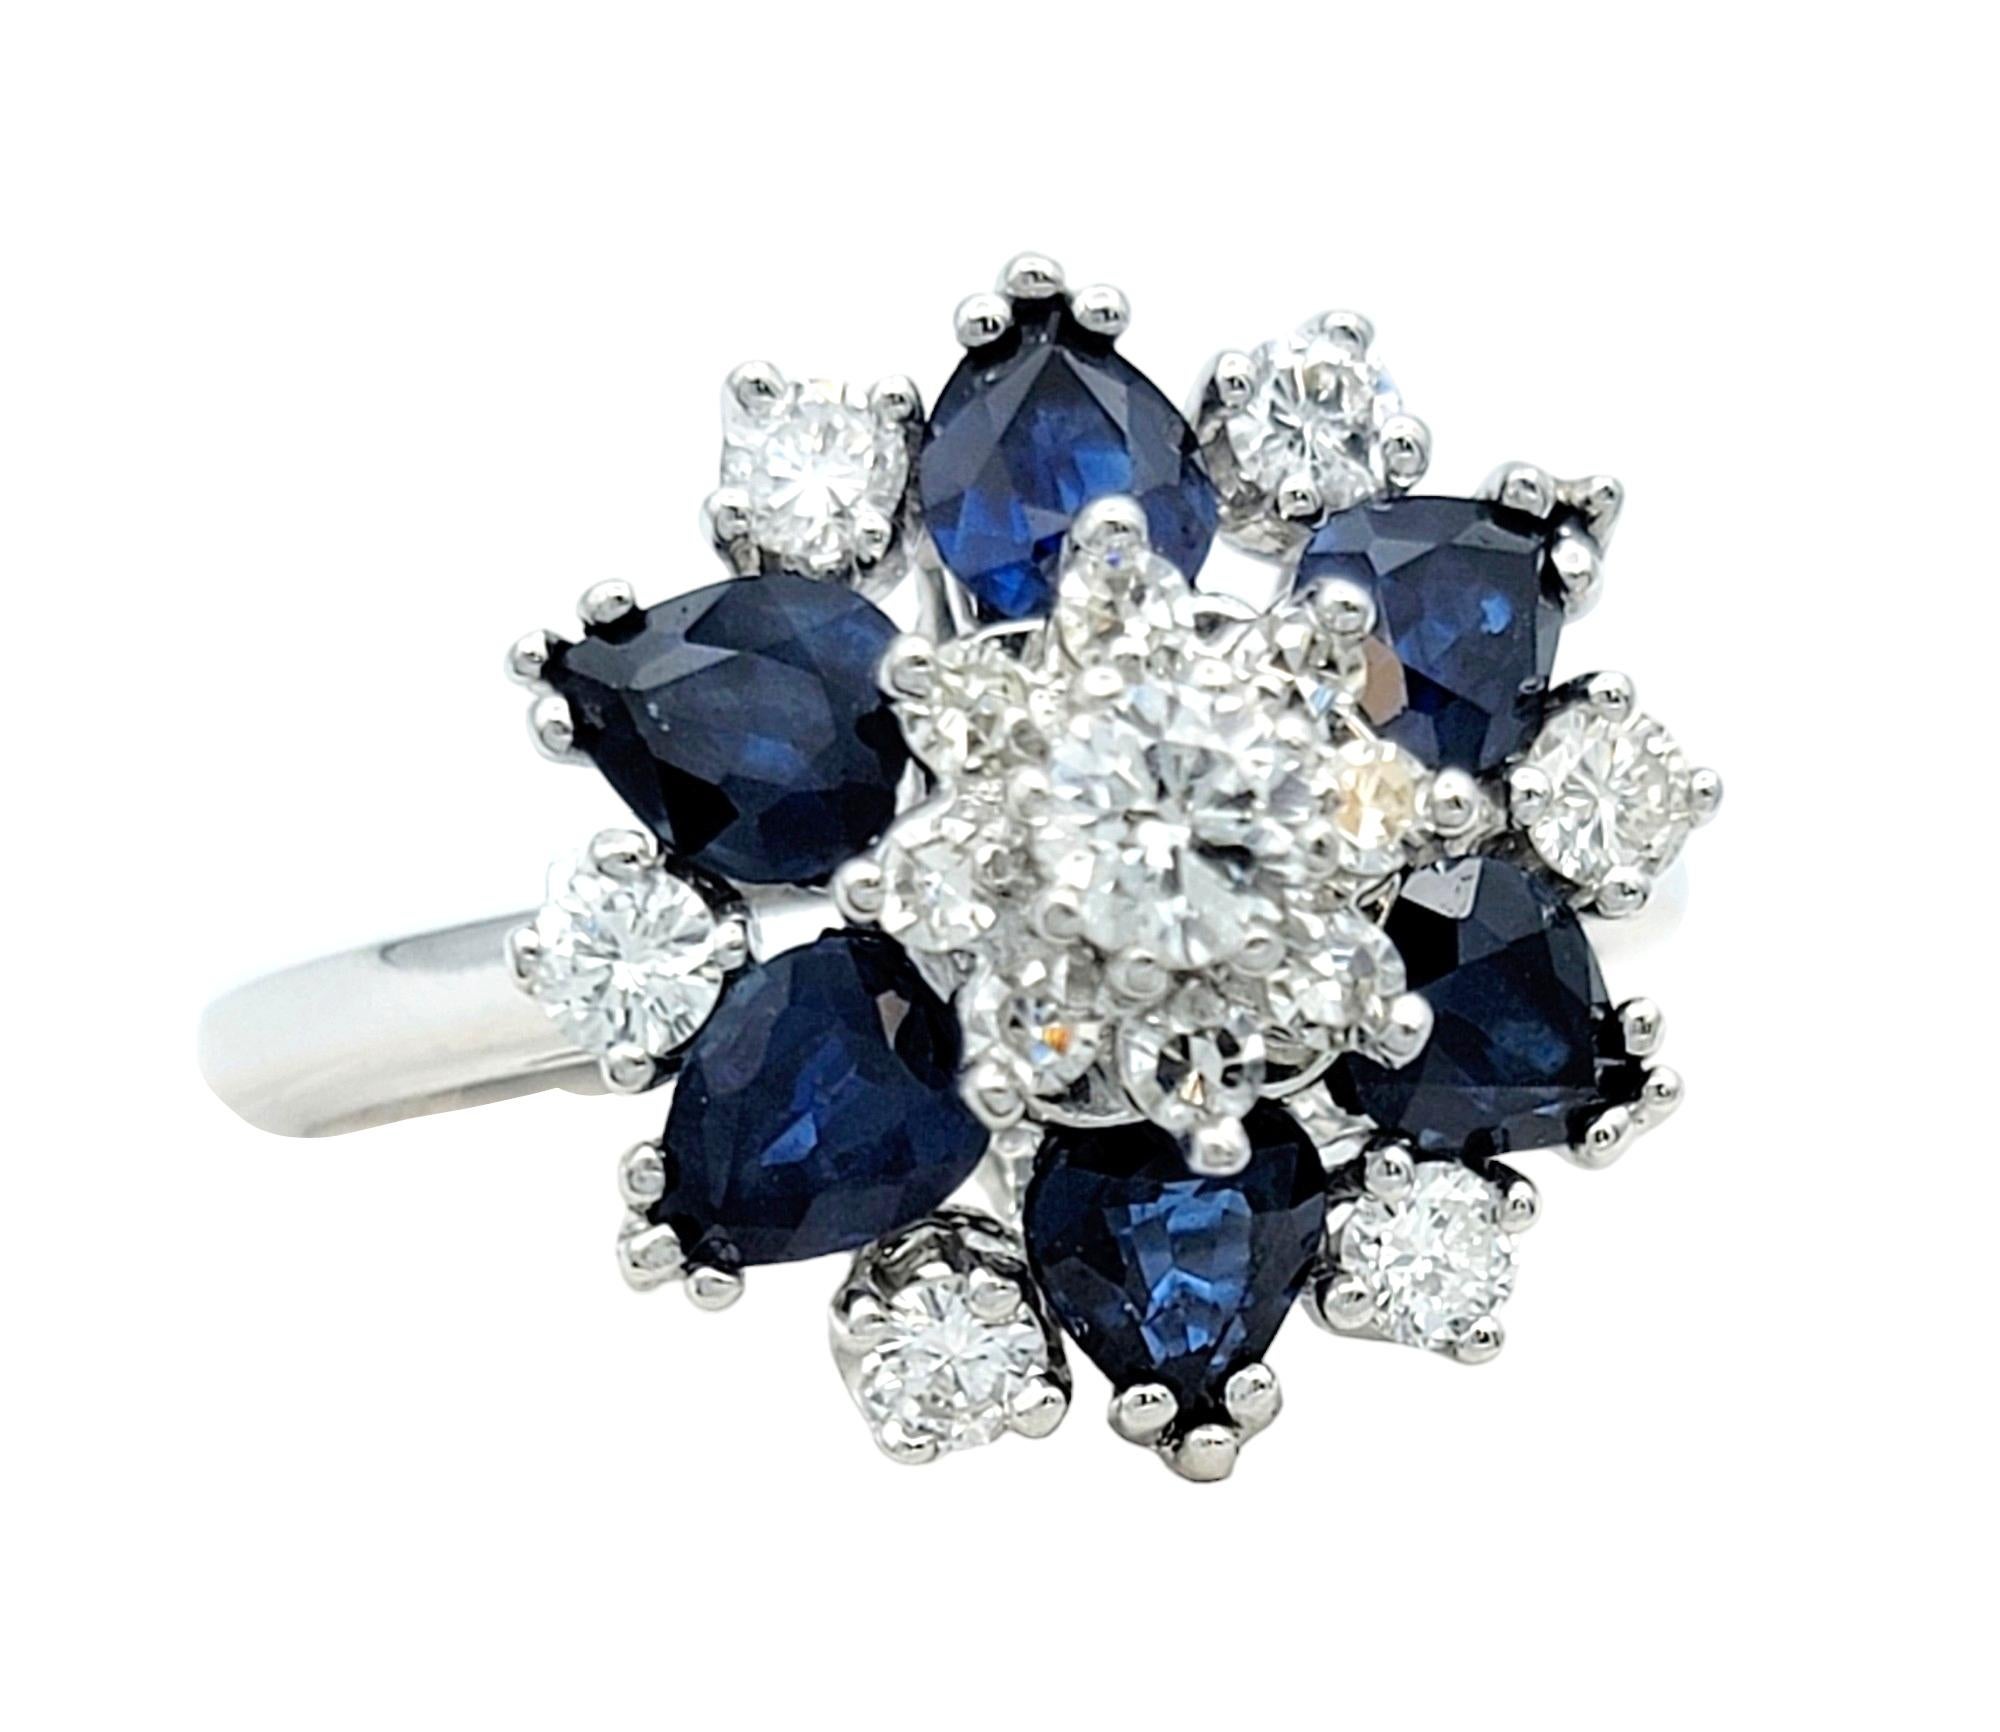 Ring Size: 8.75 

This stunning sapphire and diamond ring, set in luxurious 14 karat white gold, is an elegant a flower motif that is a beautiful addition to any ensemble. The central diamonds serve as the focal point, surrounded by pear-cut